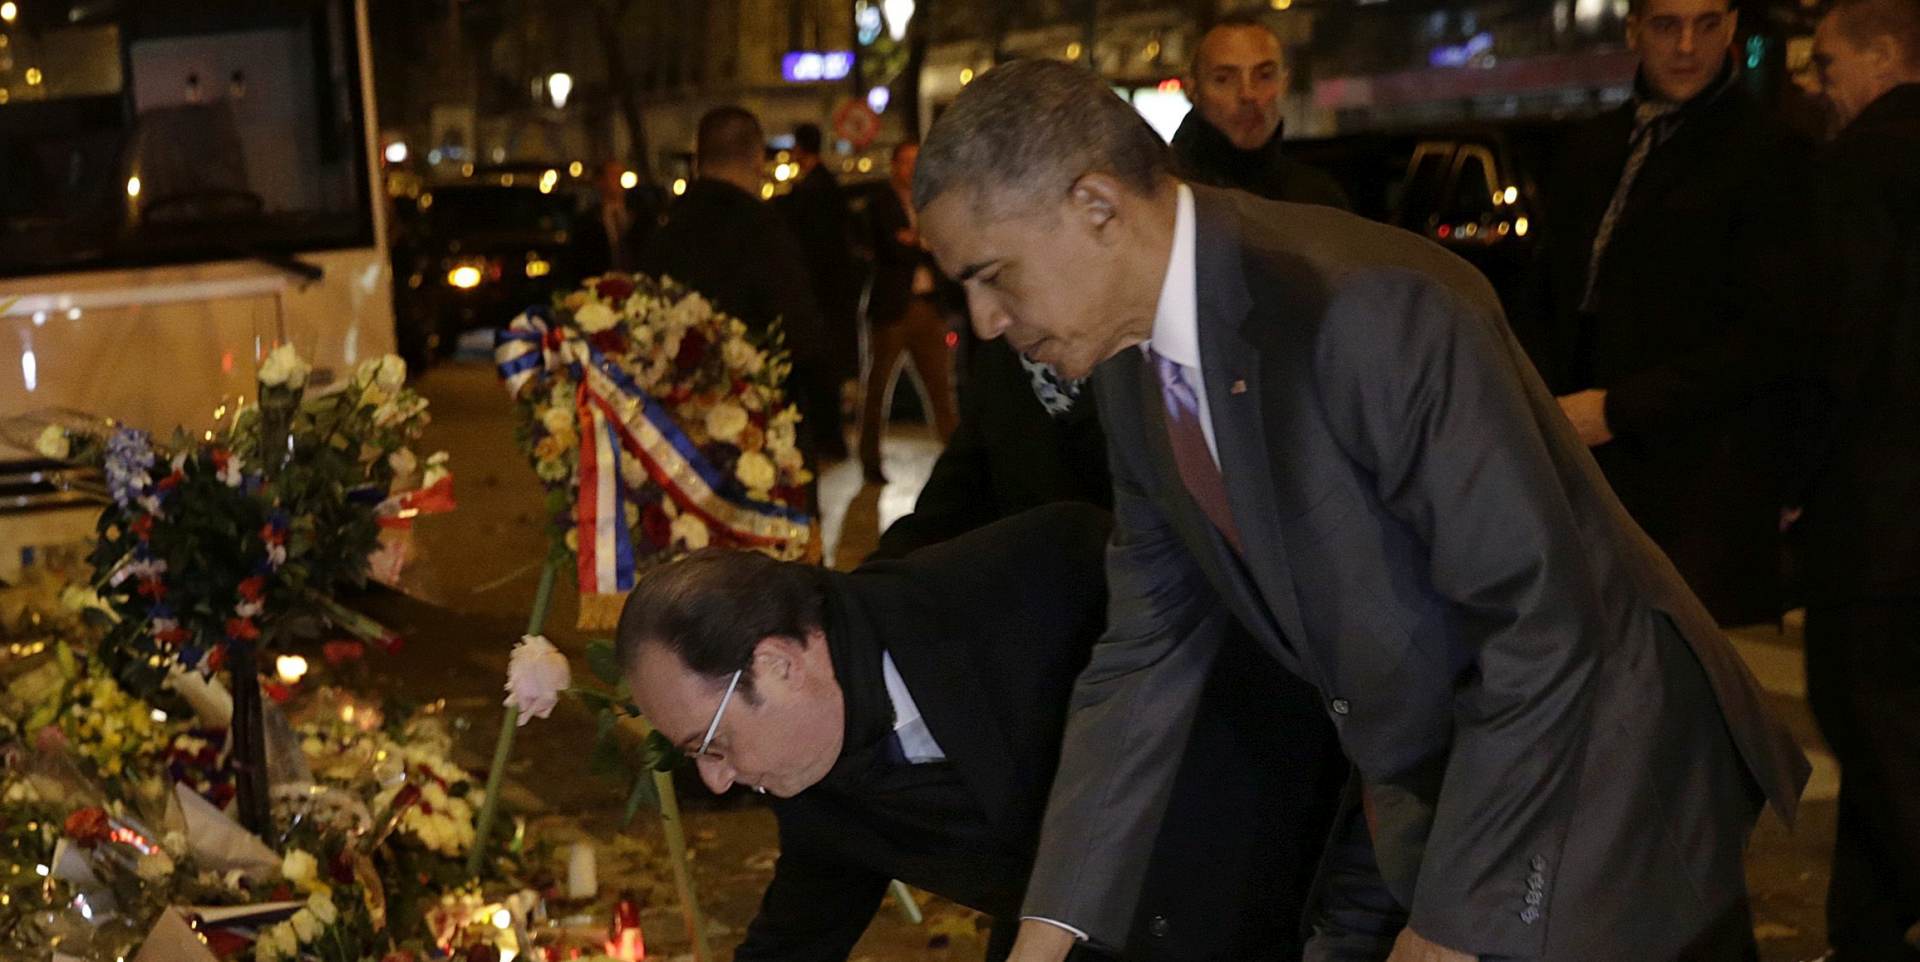 epa05048186 US President Barack Obama (R) and French President Francois Hollande (C) pay tribute to the victims of the 13 November attacks in front of the Bataclan concert venue, on the eve of  the opening of the COP21 Conference, Paris, France, 29 November 2015. The 21st Conference of the Parties (COP21) due to be held in Paris from 30 November to 11 December will proceed as planned, despite the terrorist attacks of 13 November.  EPA/PHILIPPE WOJAZER / POOL MAXPPP OUT